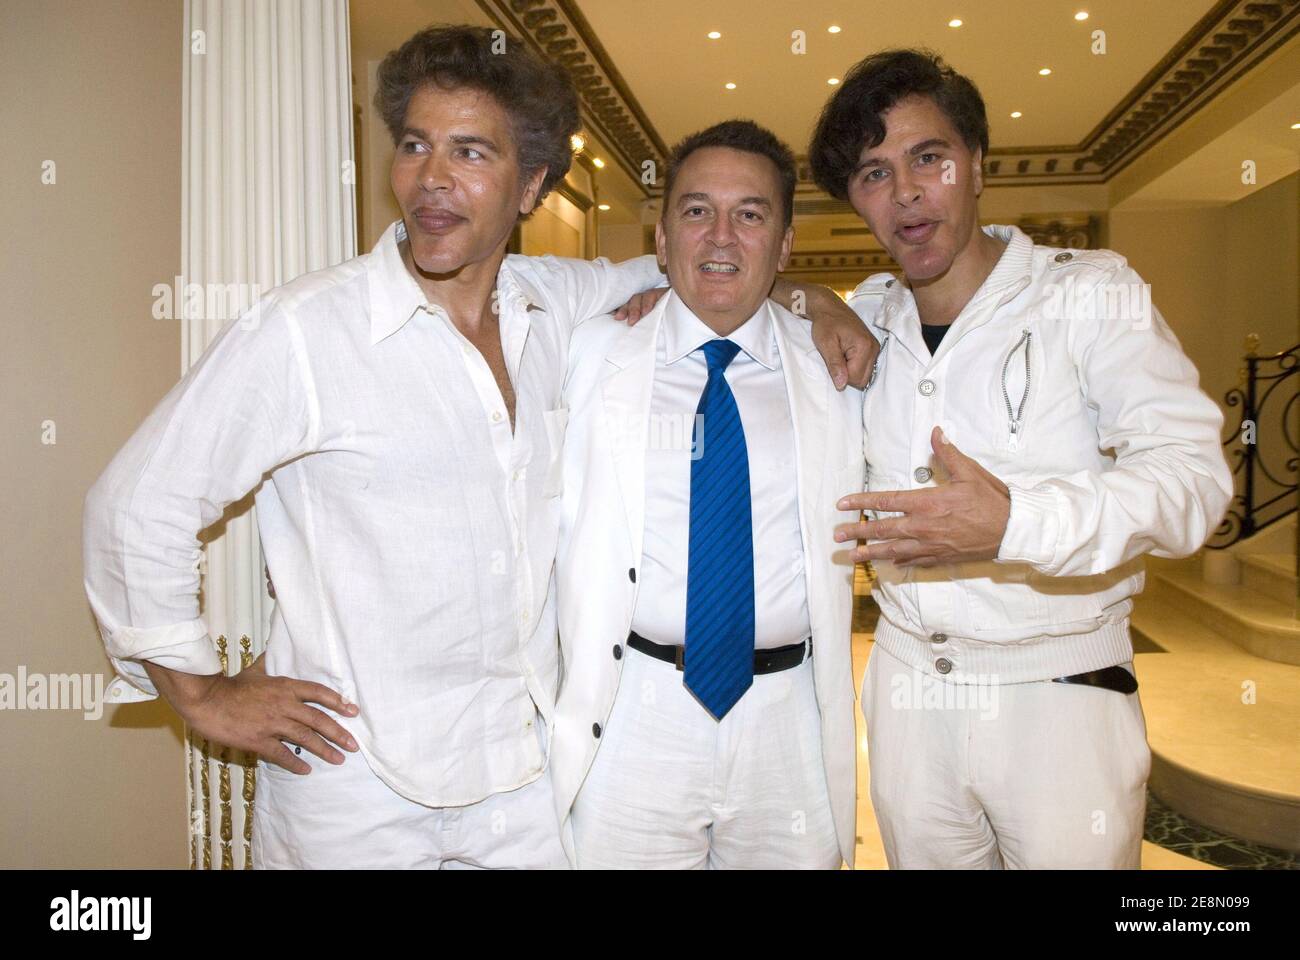 Igor Bogdanoff, Telemedia CEO Pierre Guillermo and Grichka Bogdanoff partying at the 'Soiree Blanche' organized by the best businessman of the year Pierre Guillermo in Paris, France on July 14, 2007. Photo by Helder Januario/ABACAPRESS.COM Stock Photo